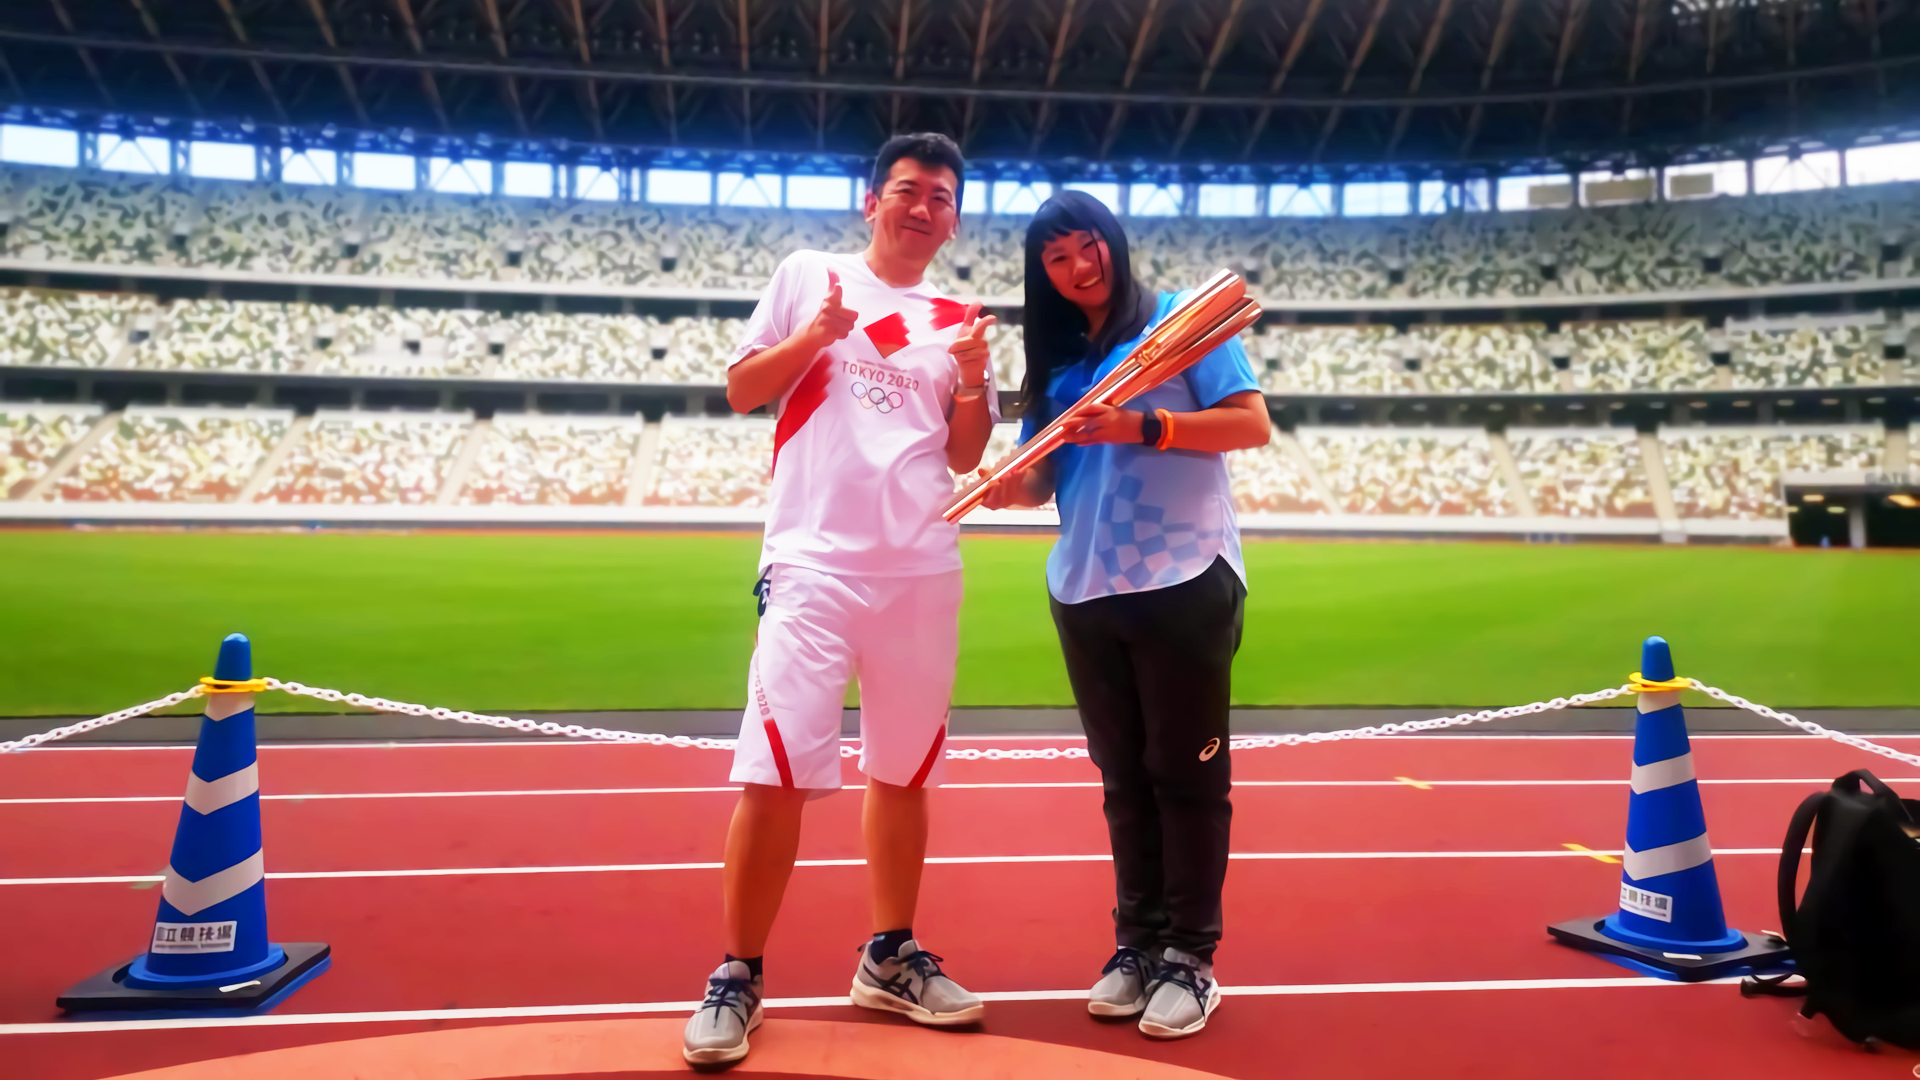 Symbol of the TOKYO 2020 Games: At the National Stadium